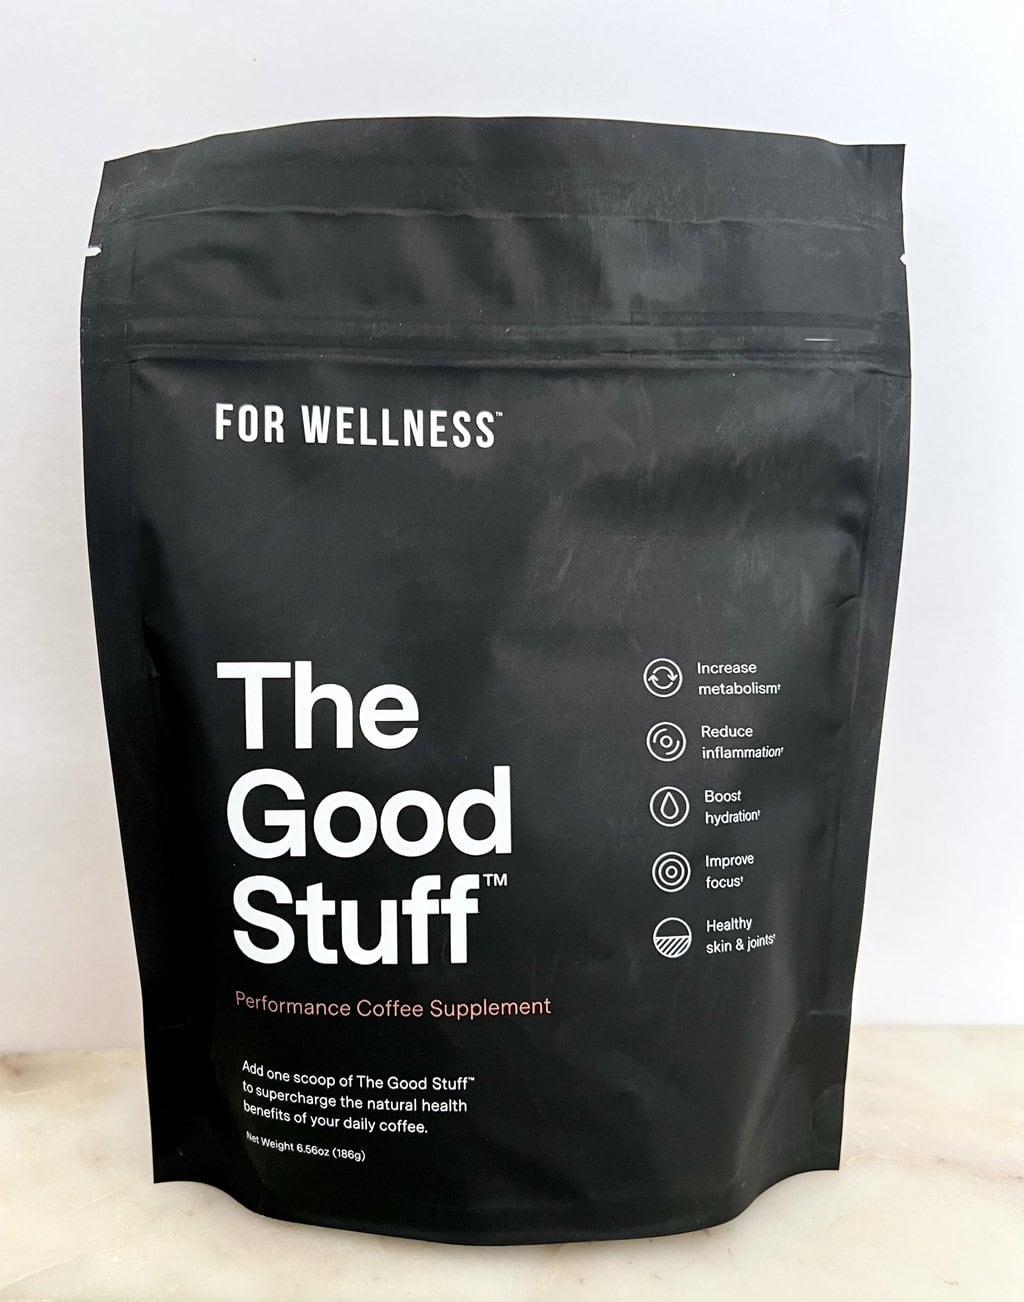 For Wellness The Good Stuff coffee pack